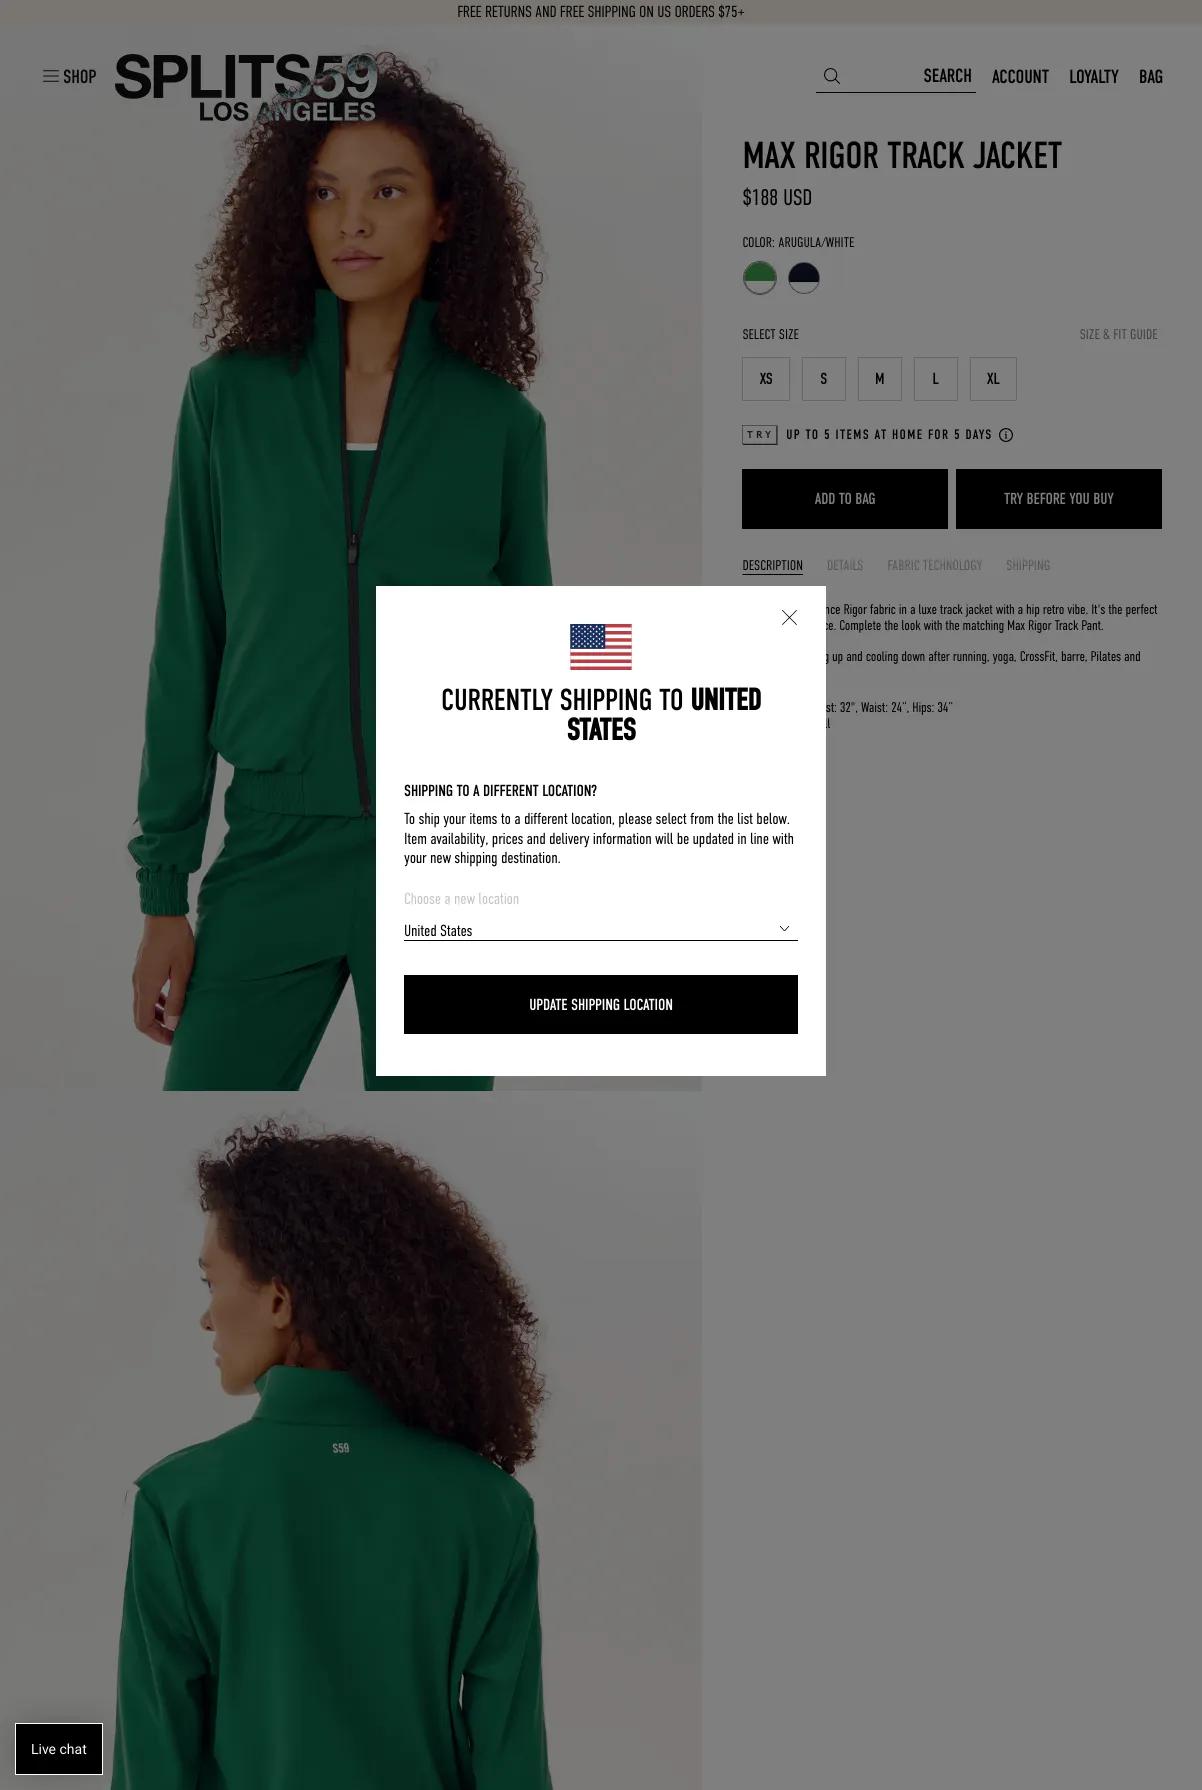 Screenshot 3 of Splits59 (Example Shopify Clothing Website)